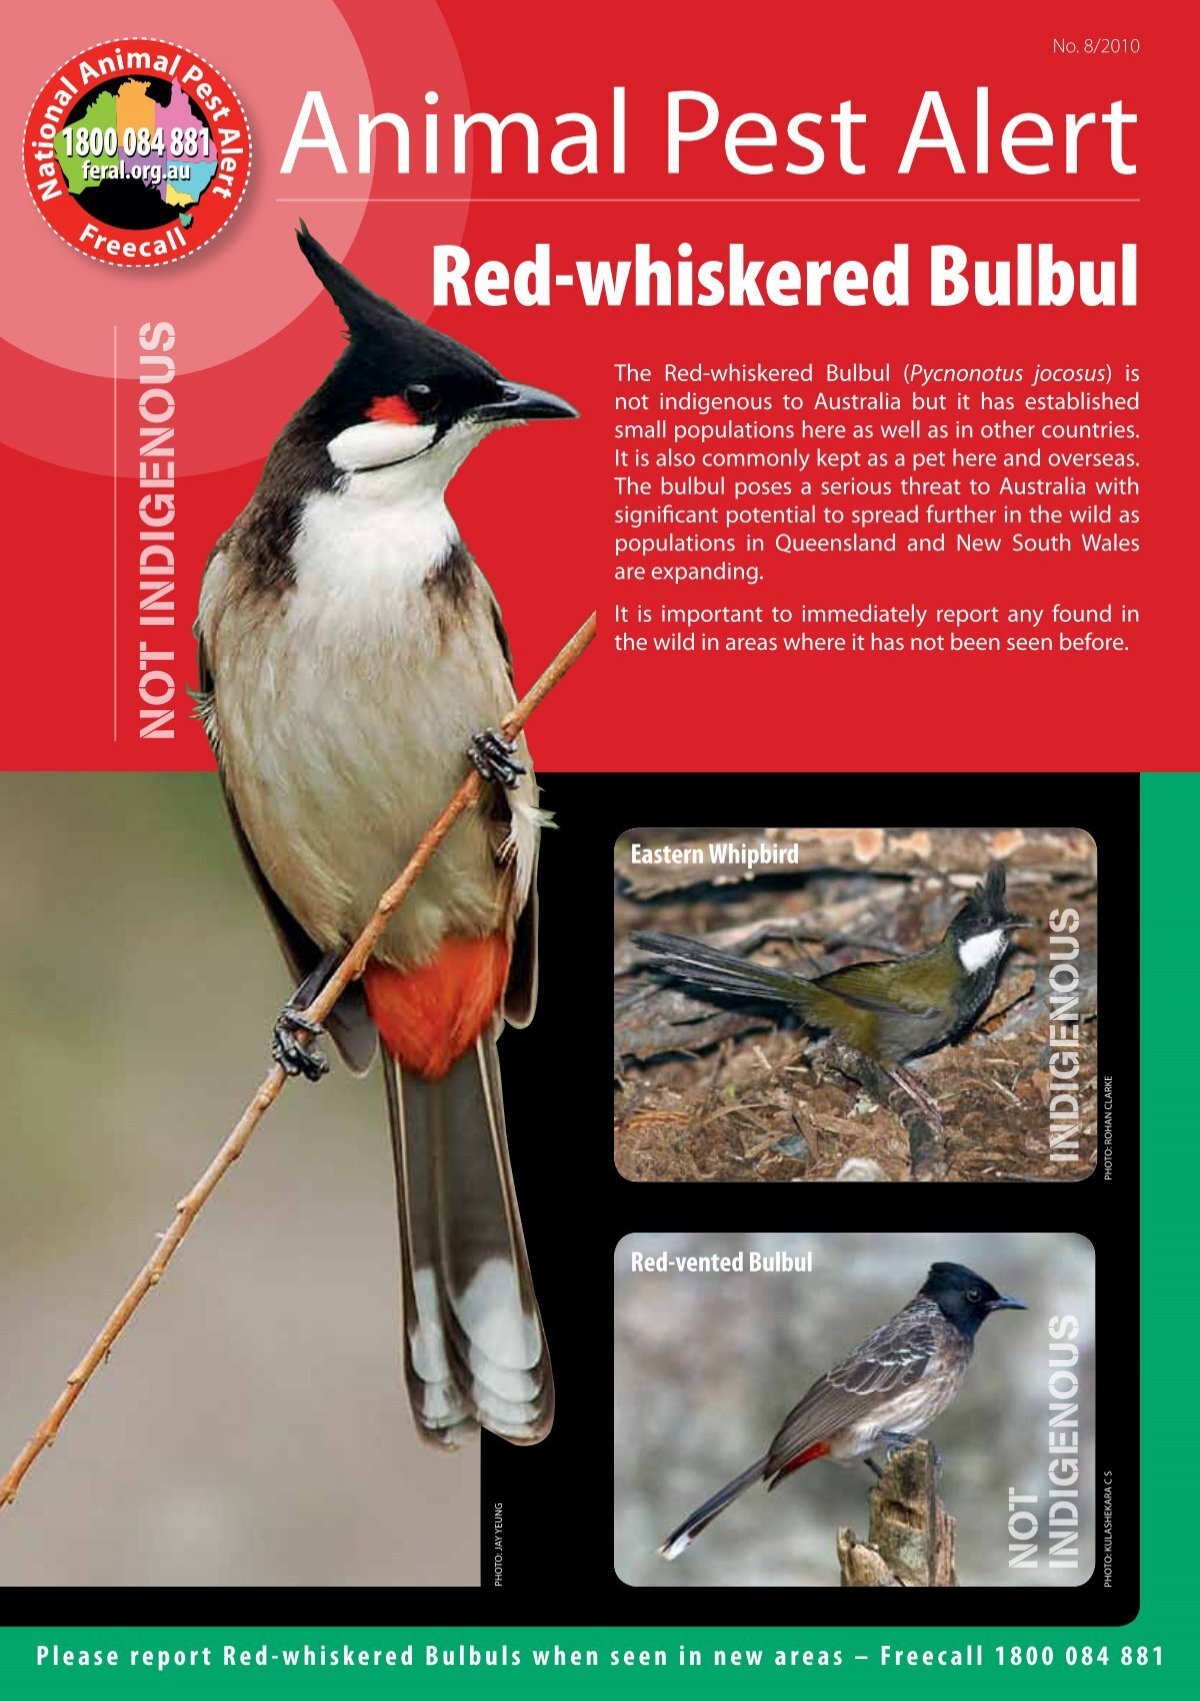 diagram glemme Fortryd Red-whiskered Bulbul - Department of Agriculture and Food